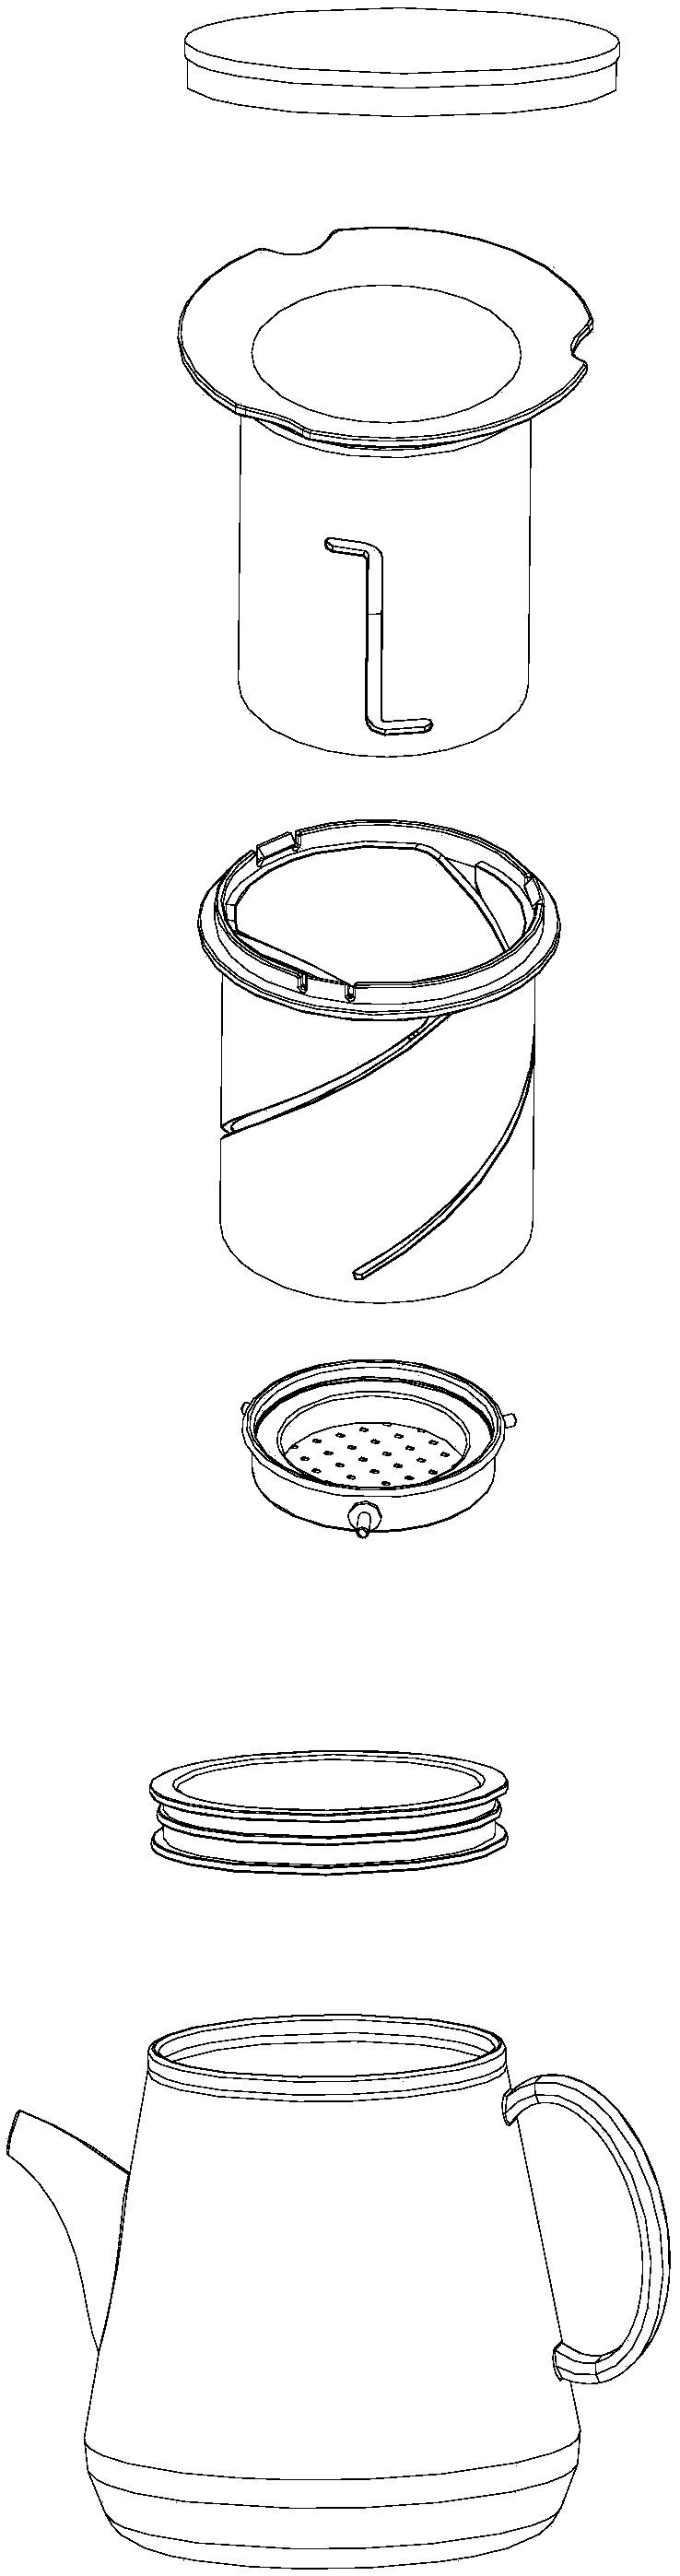 Rotary lifting type assembly and application thereof